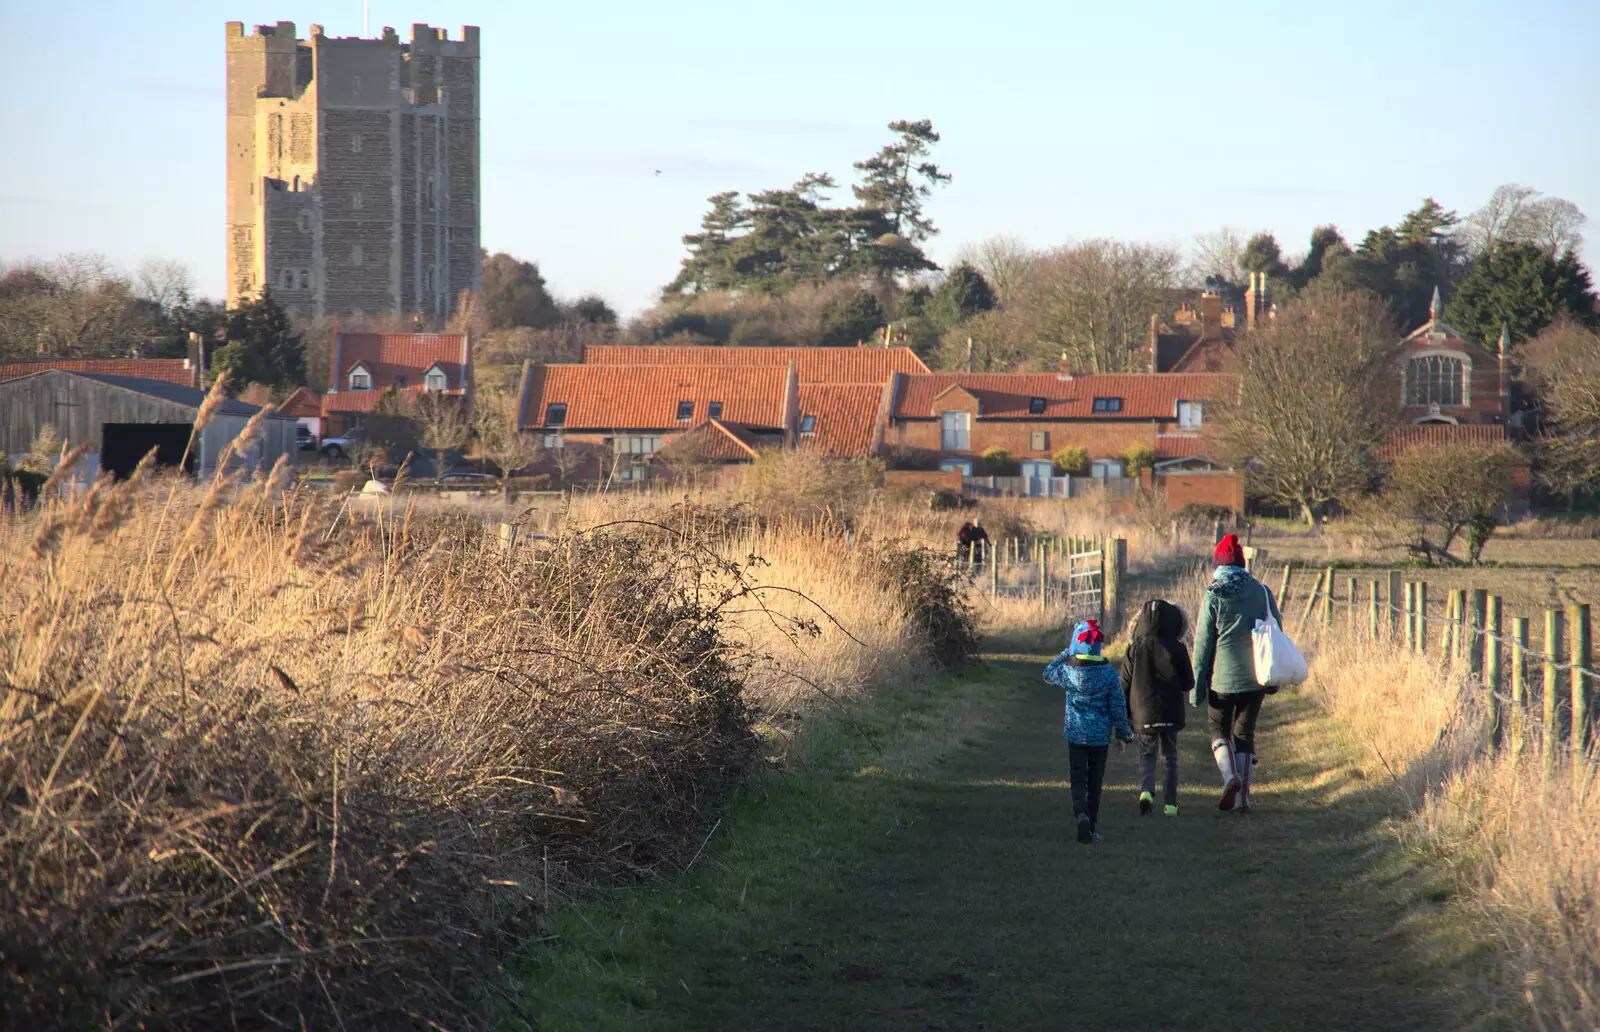 We walk over the marshes back to the castle, from An Orford Day Out, Orford, Suffolk - 17th February 2018